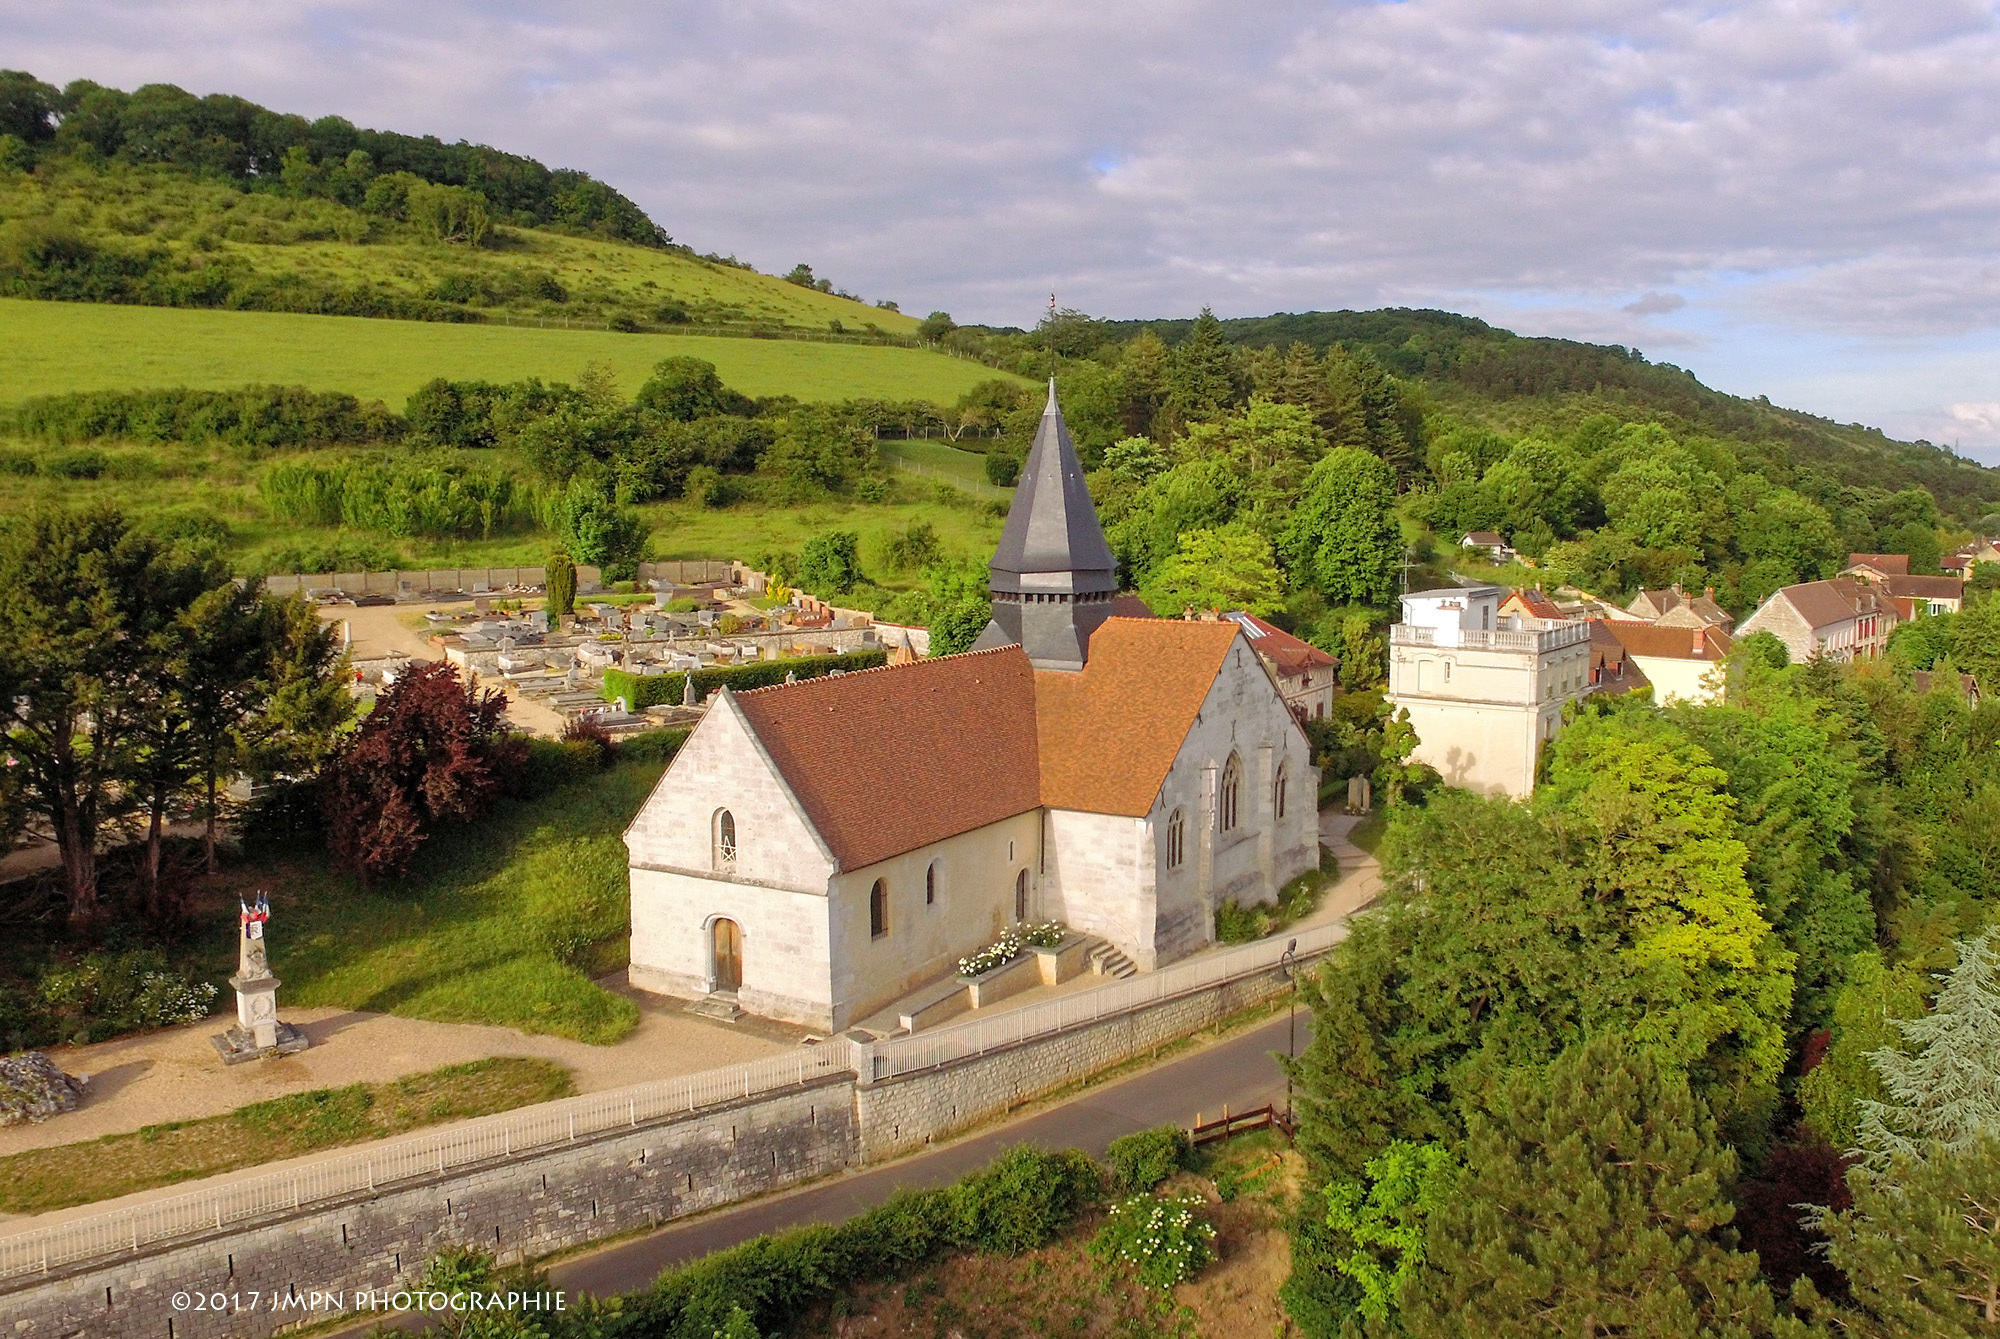 Villages in France - Giverny © Jmpn photographie - licence [CC BY-SA 4.0] from Wikimedia Commons